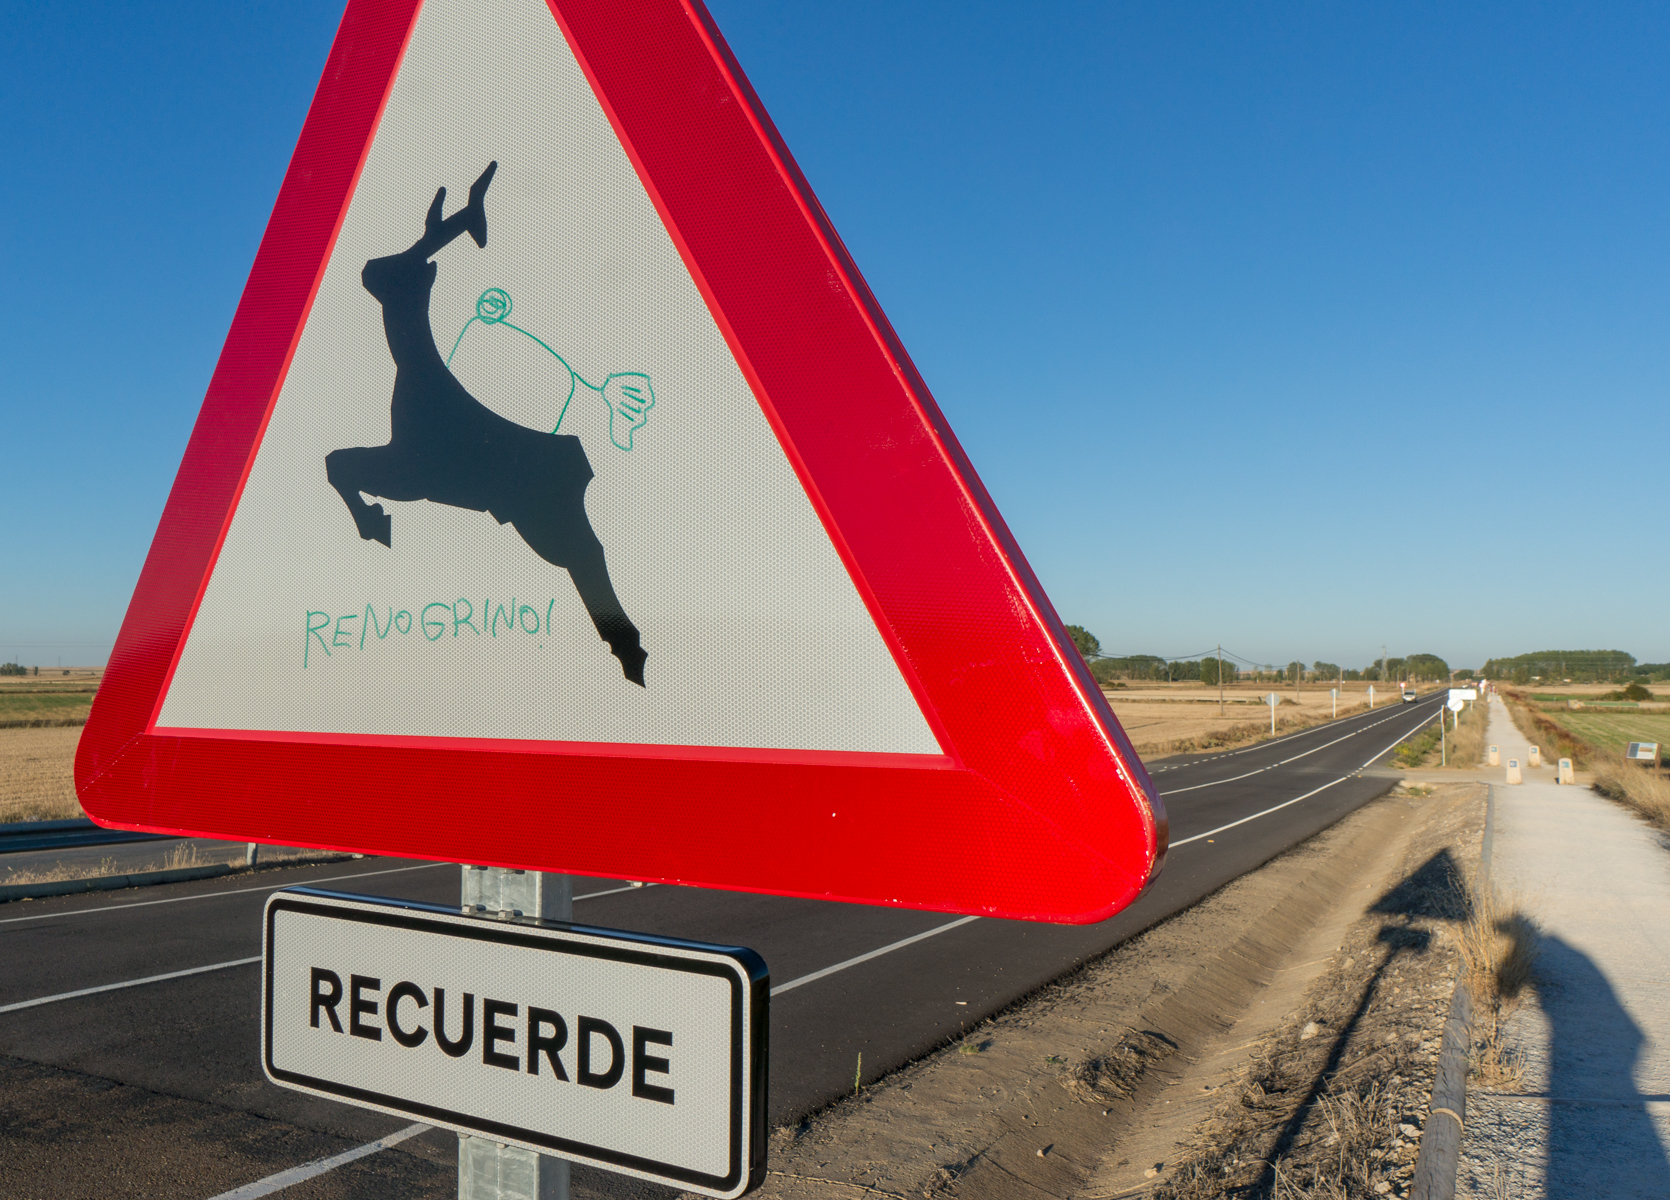 Graffiti-enhanced traffic sign on a highway parallel to the Camino Francés west of Frómista, Spain | Photo by Mike Hudak